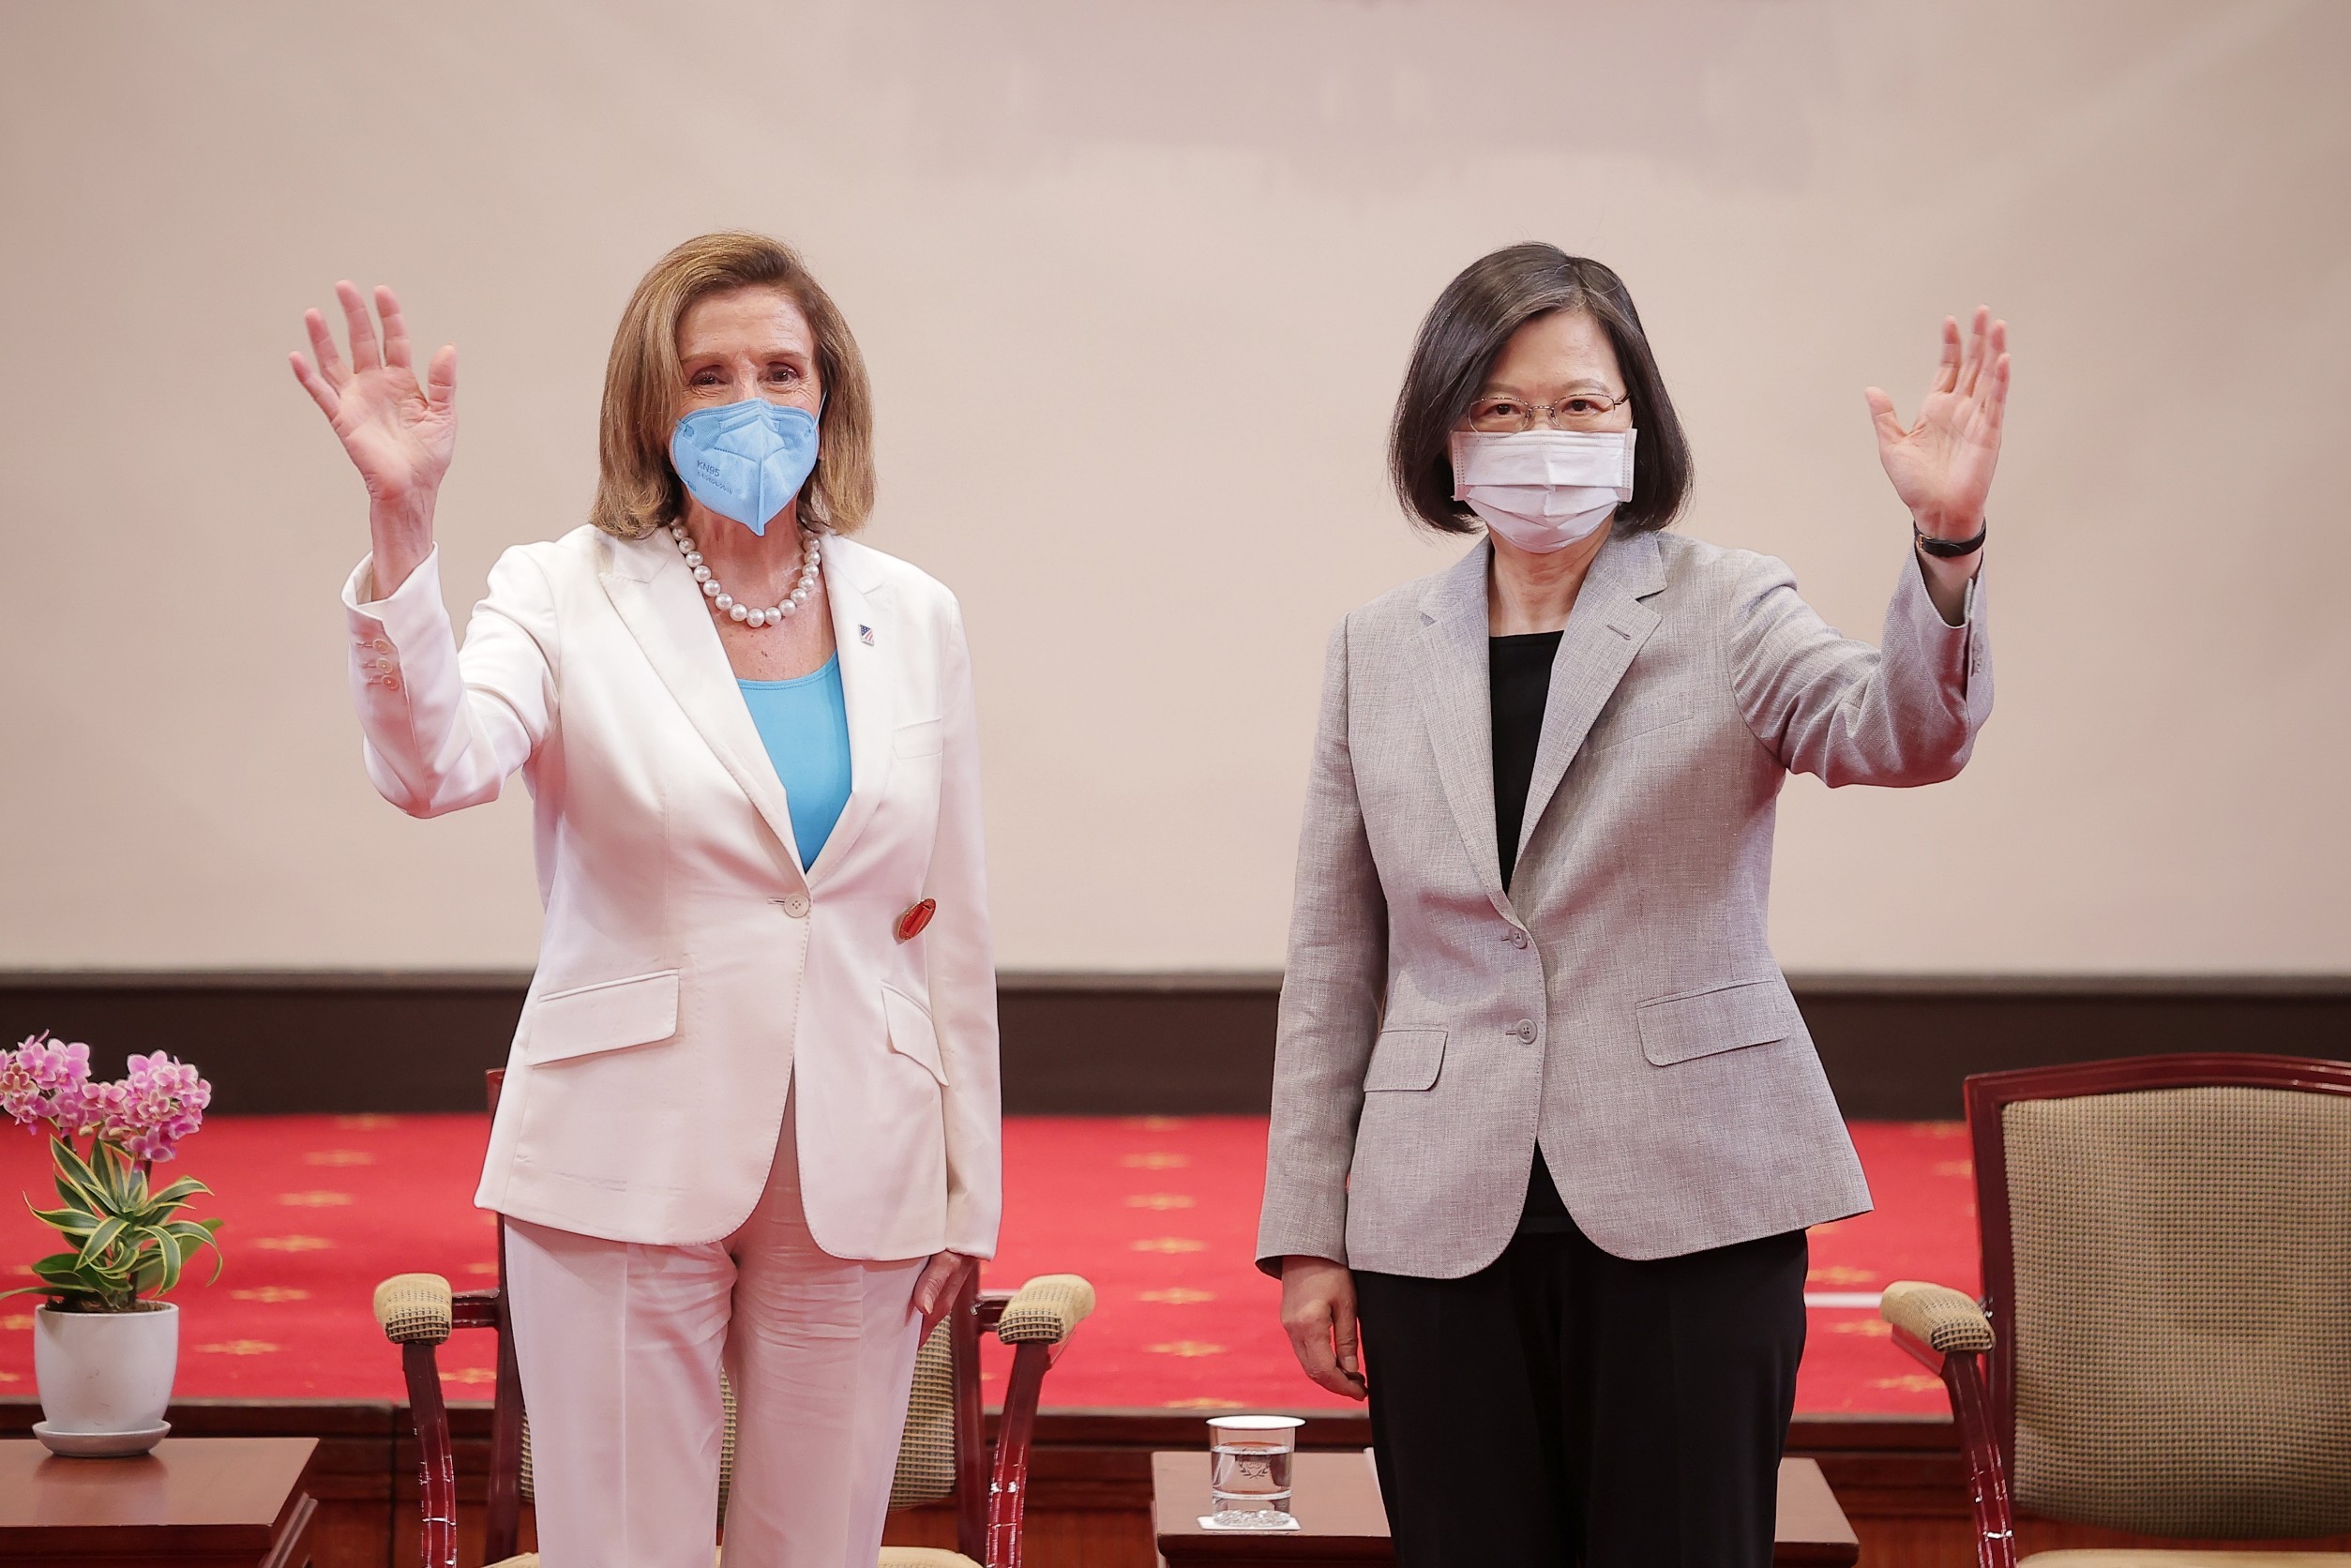 https://commons.wikimedia.org/wiki/File:Pelosi_And_Tsai_Wave_Hands_by_Chien.jpg